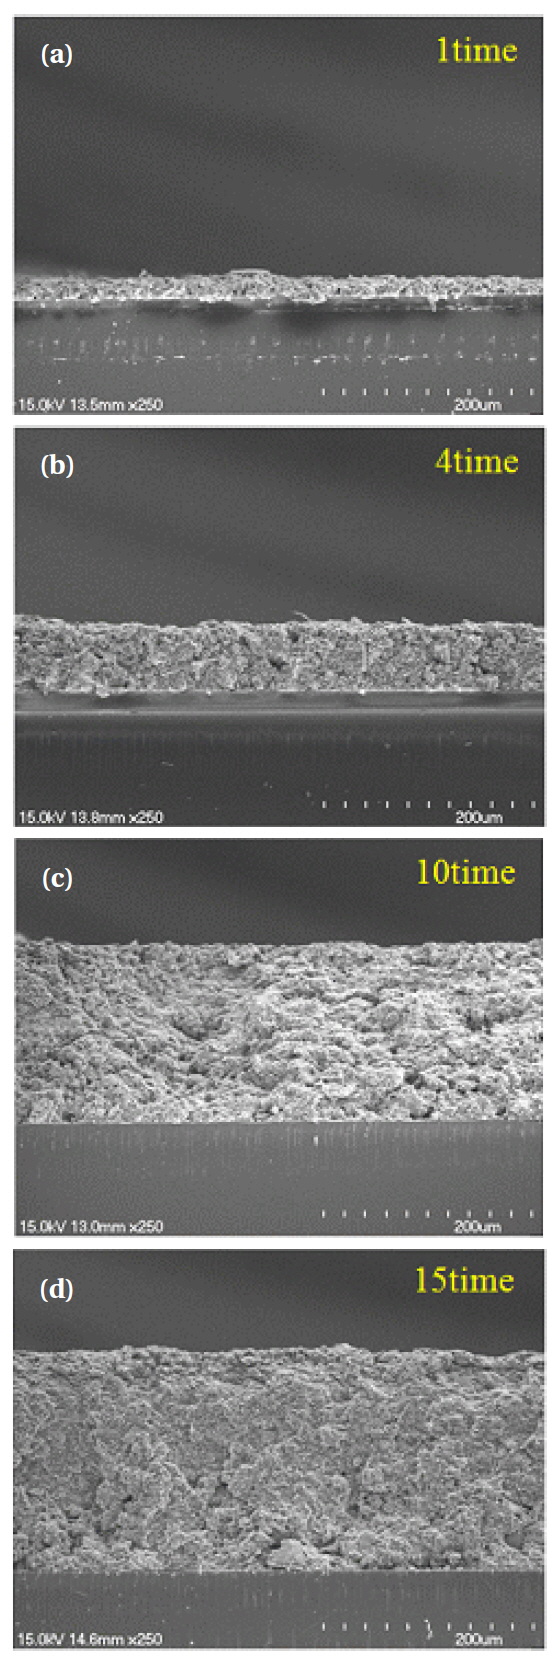 Sectional images of the  ZnGa2O4 phosphor thick films at the various thicknesses.